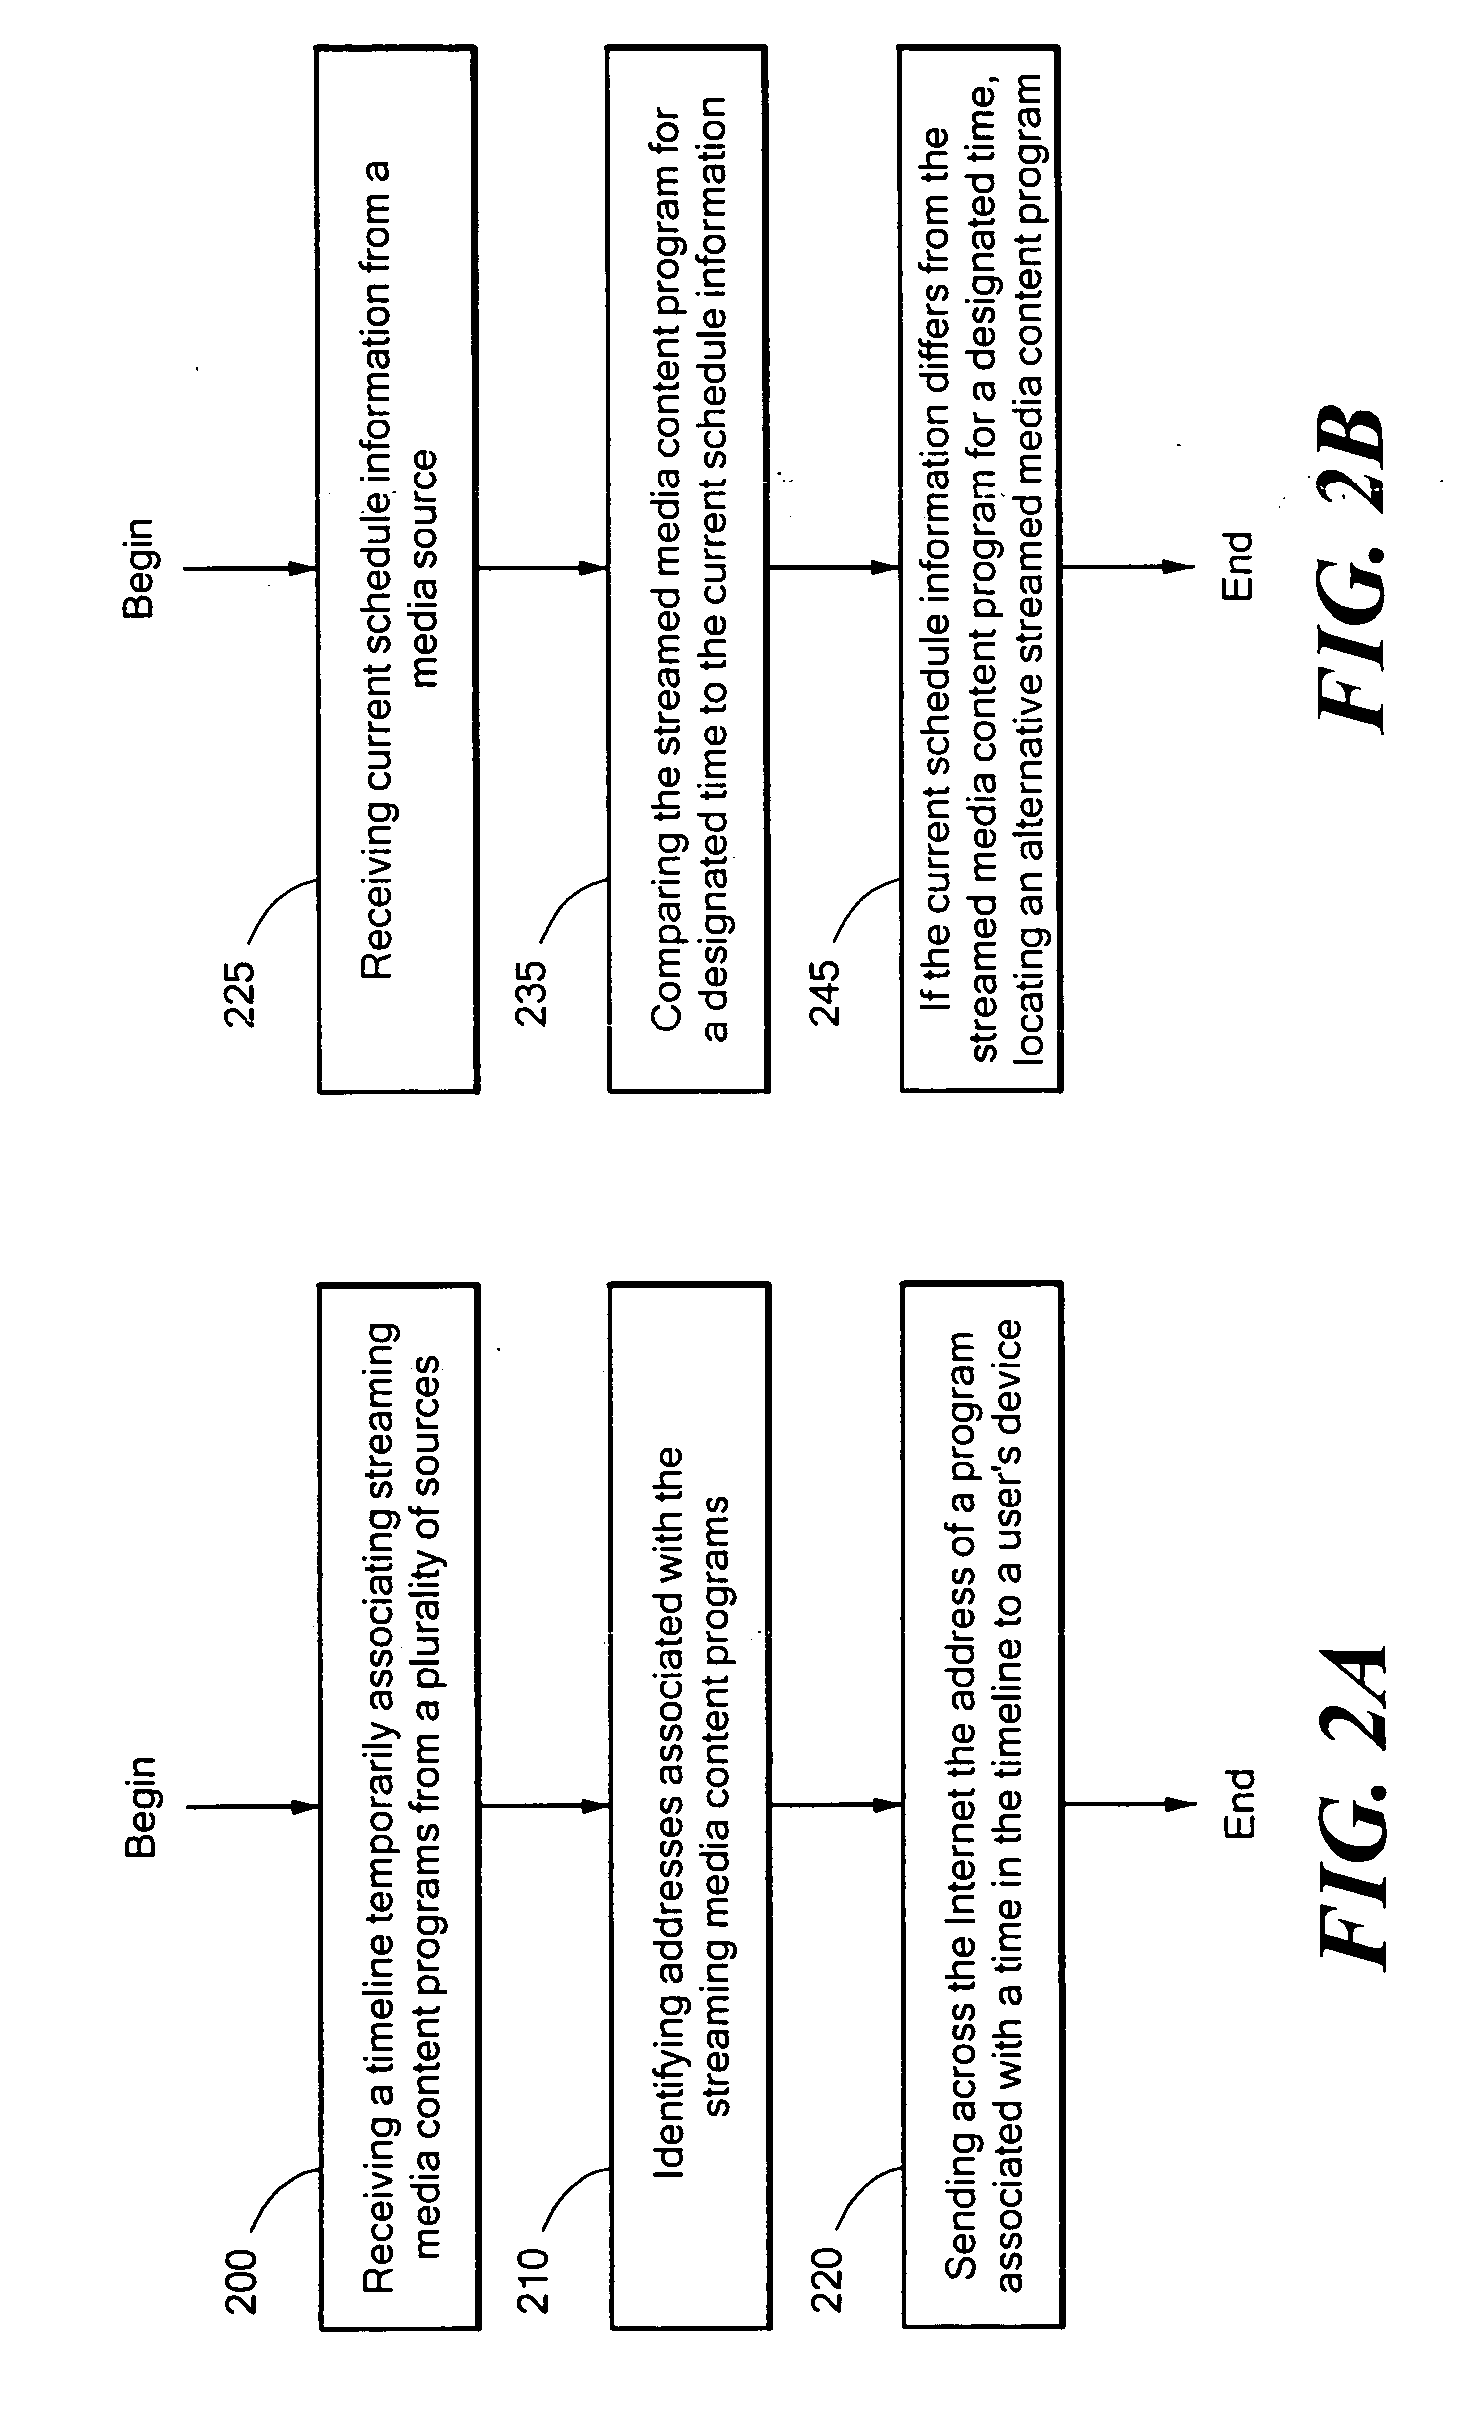 Systems and Methods for Creation and Use of a Timeline of Broadcast Streaming Media Programs